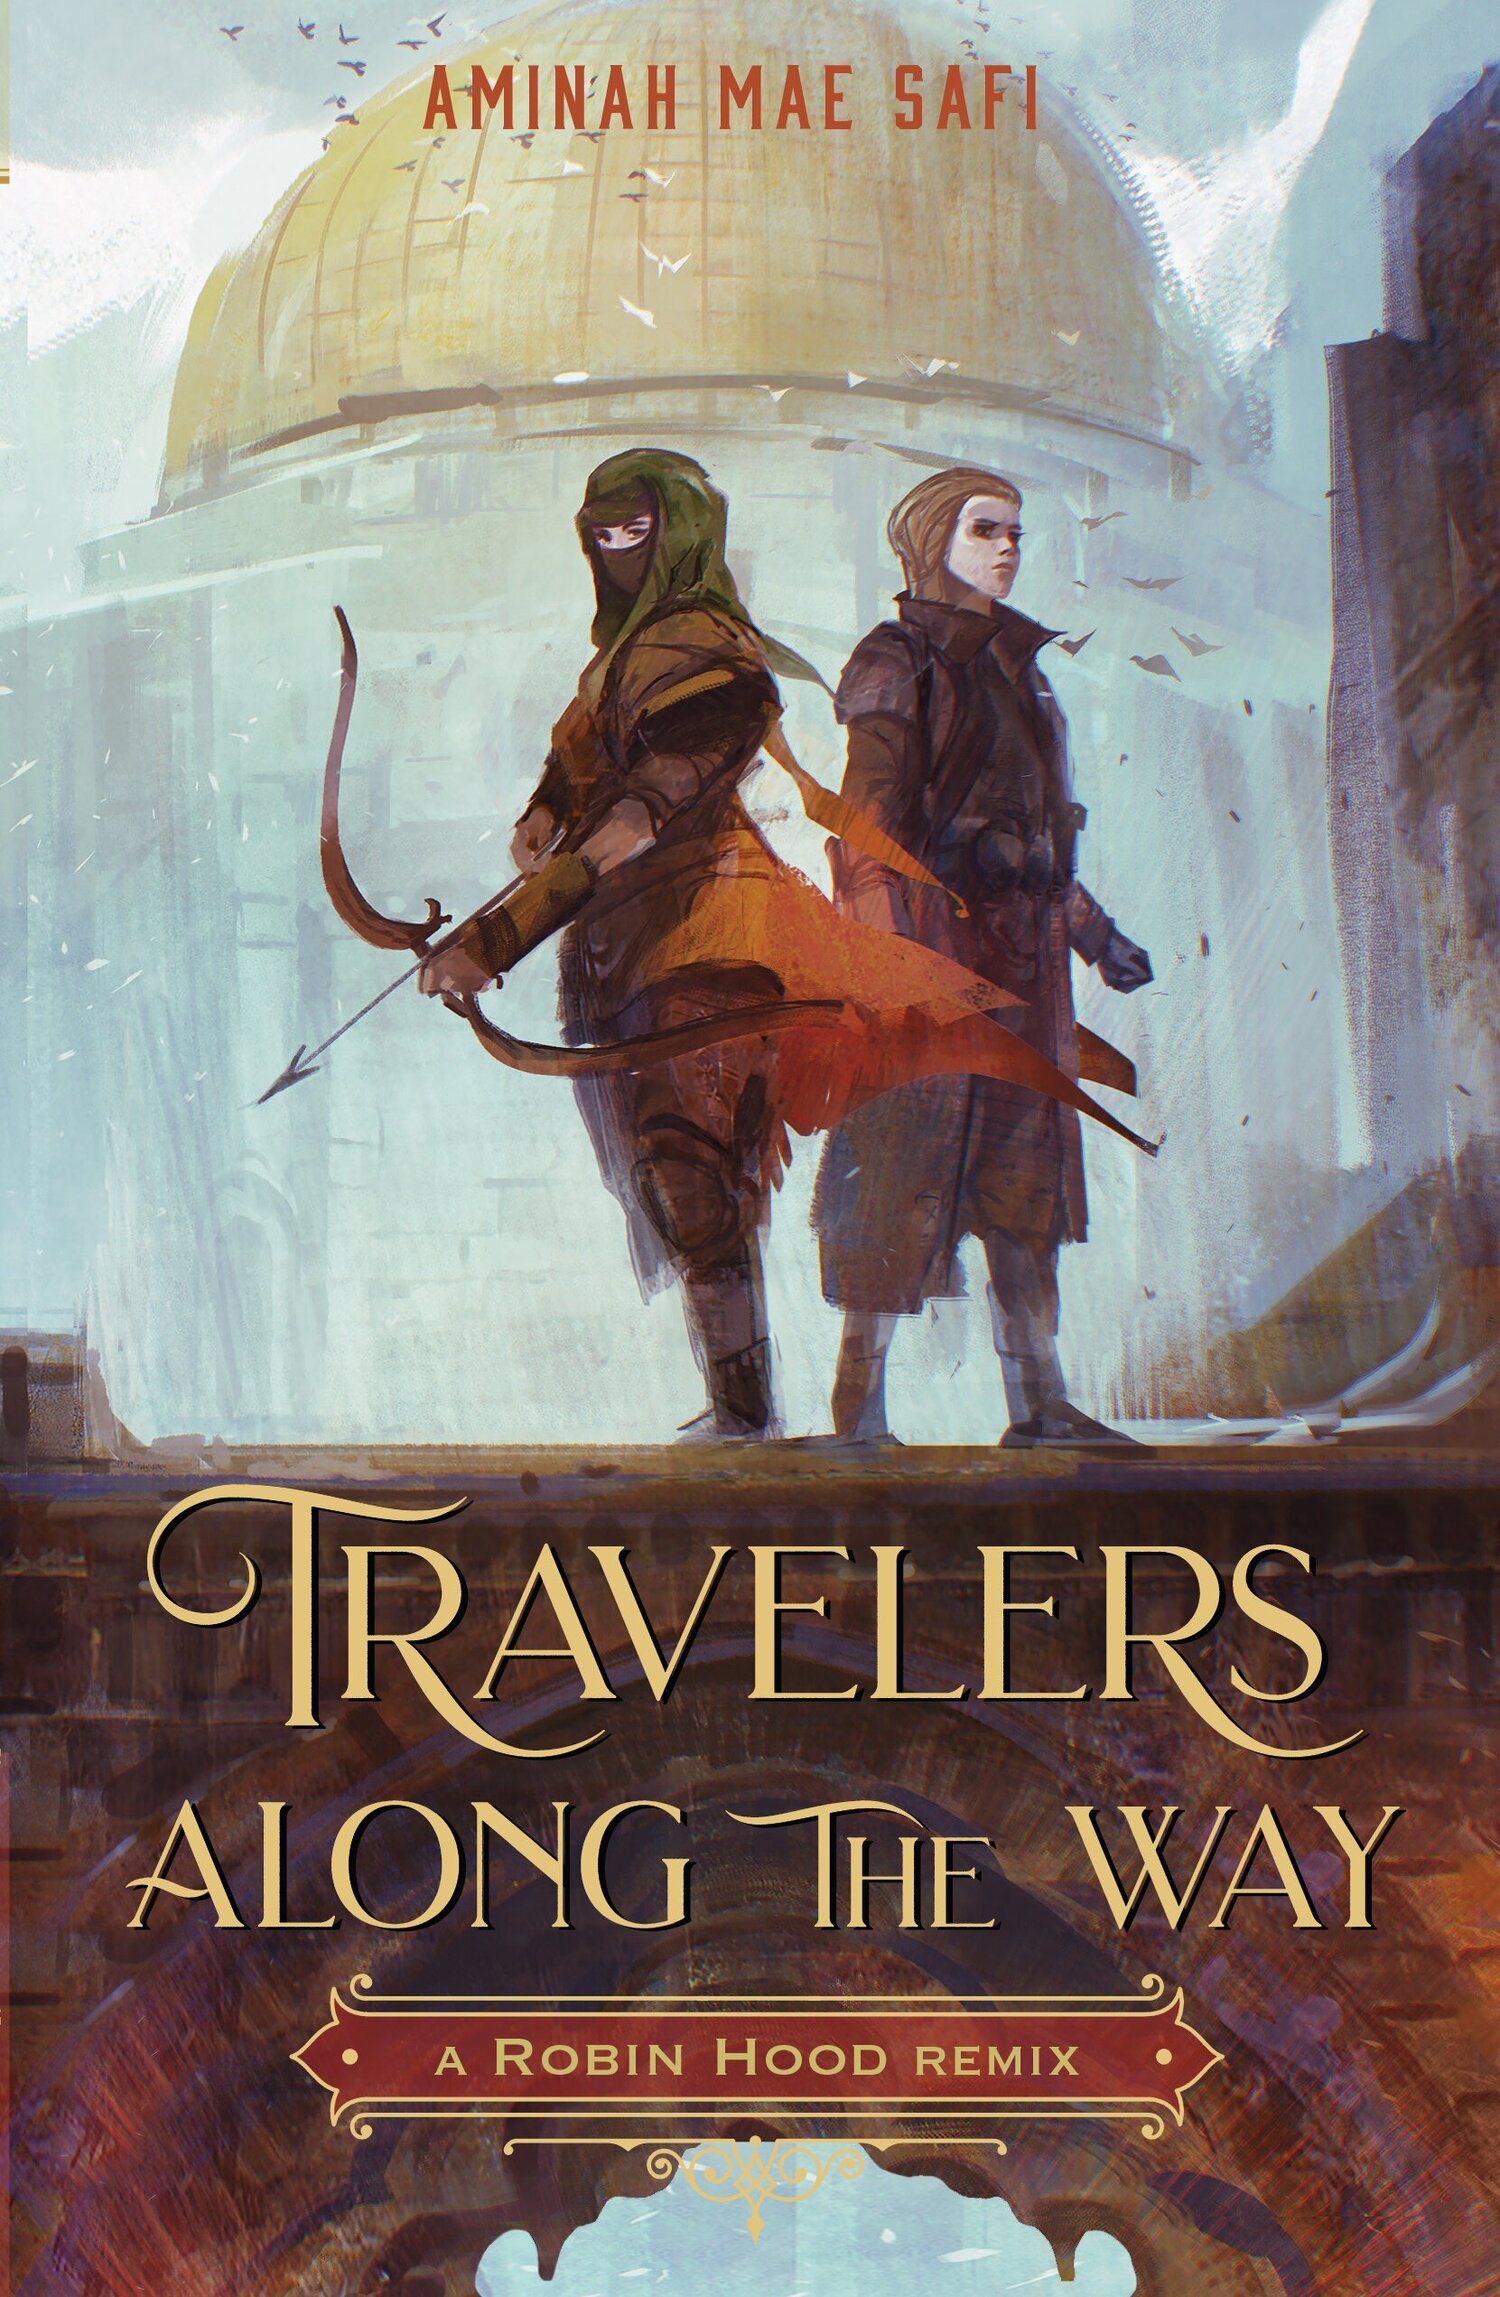 Book cover of 'Travelers Along the Way, showing two figures in headscarves in front of a domed building. One holds a bow and arrow.